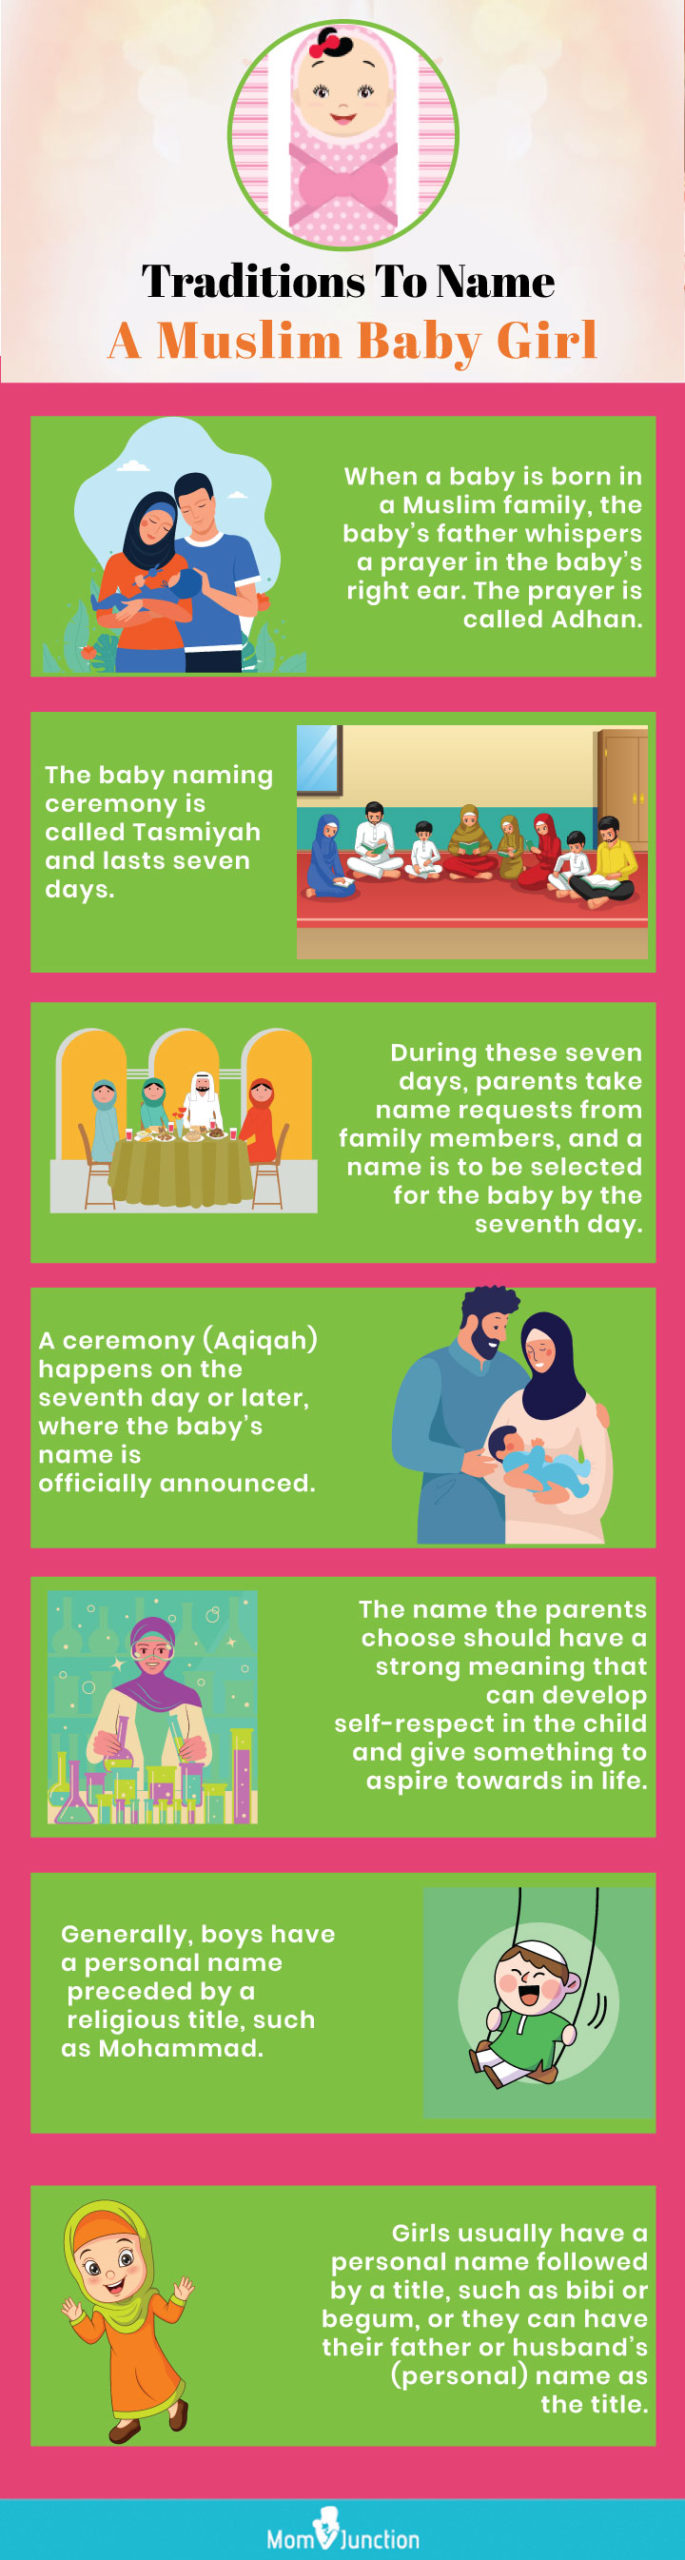 traditions to name a muslim baby girl (infographic)